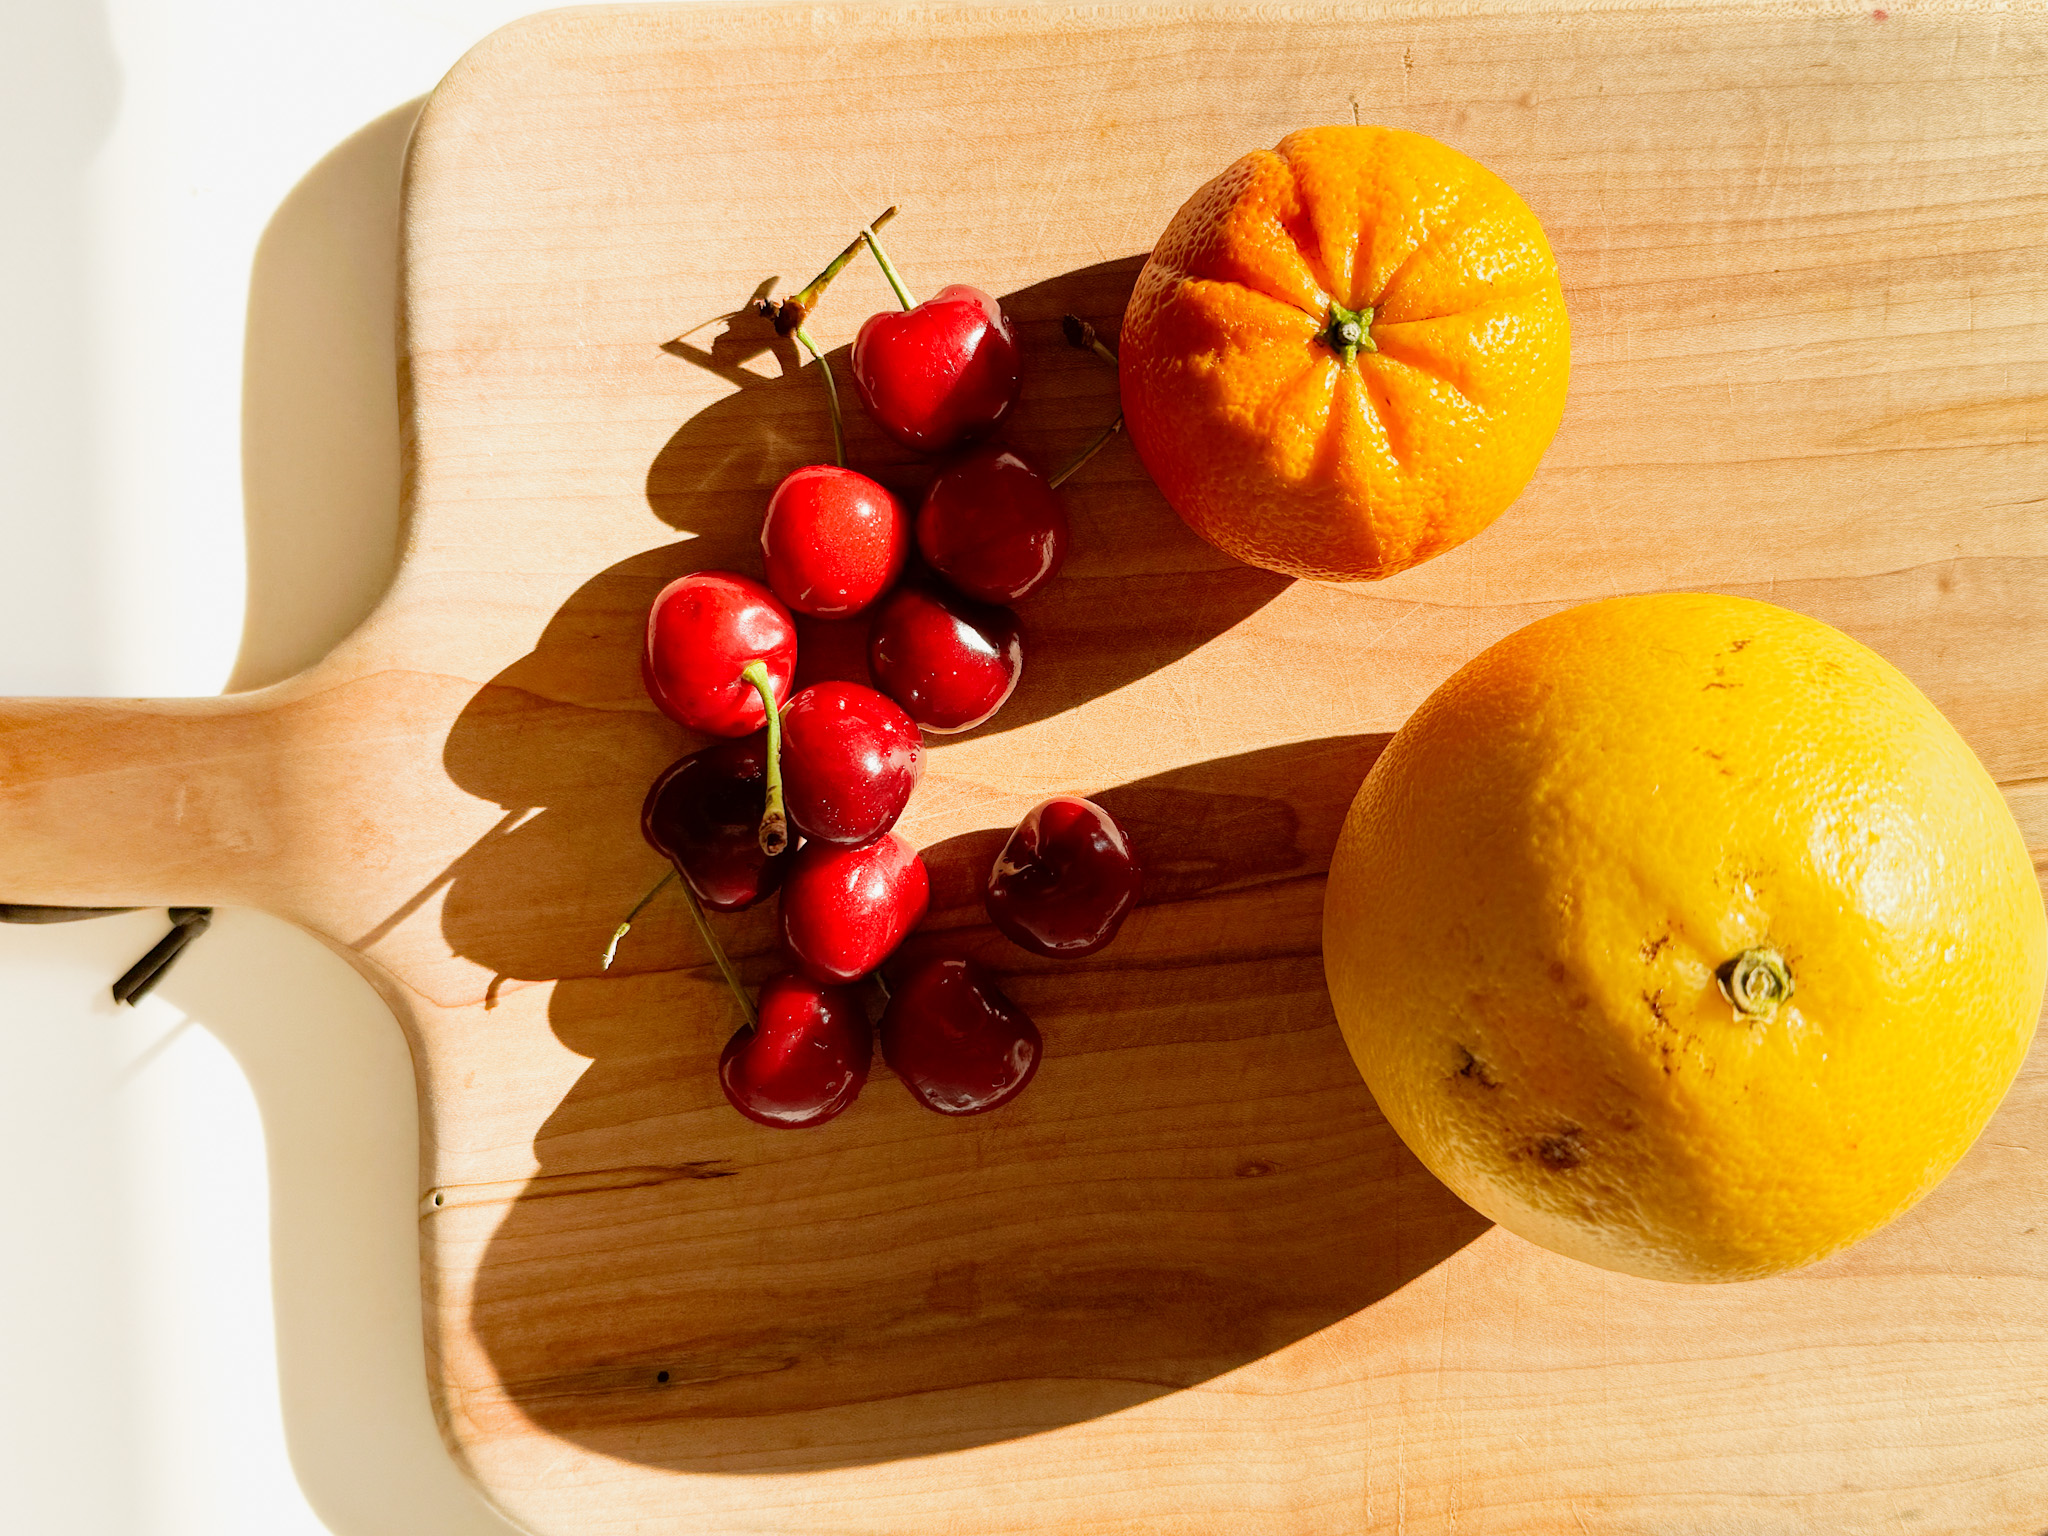 Cutting board with cherries, a grapefruit and a smal orange.